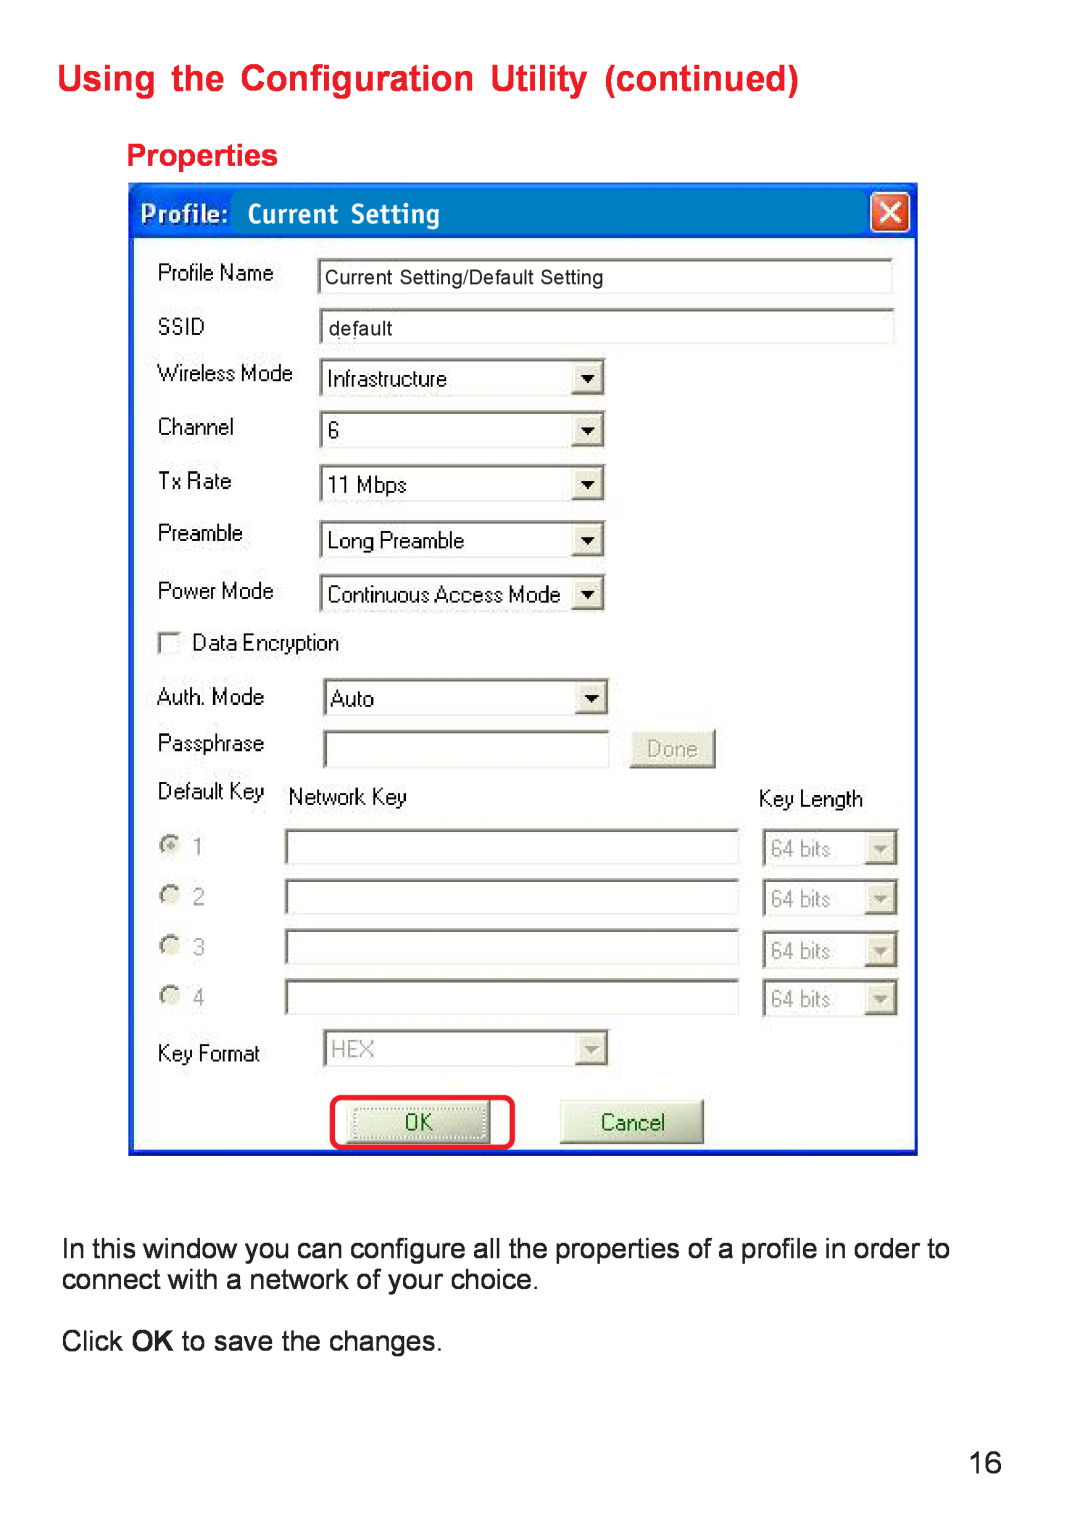 D-Link DWL-120+ manual Using the Configuration Utility continued, Properties, Current Setting 